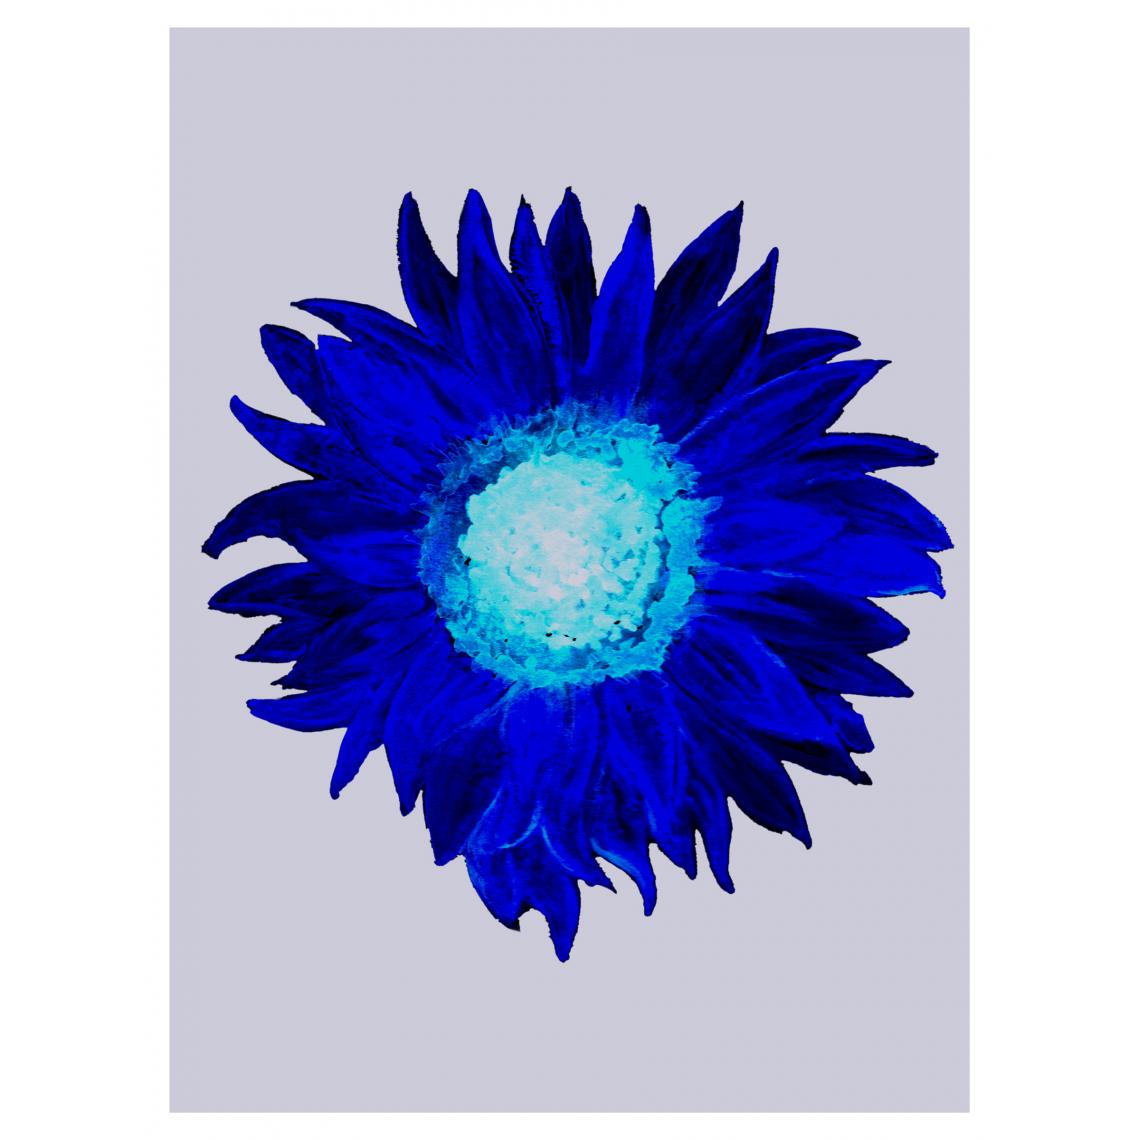 Beneffito - NATURE - Signature Poster - Sunflower_1 - 40x60 cm - Affiches, posters